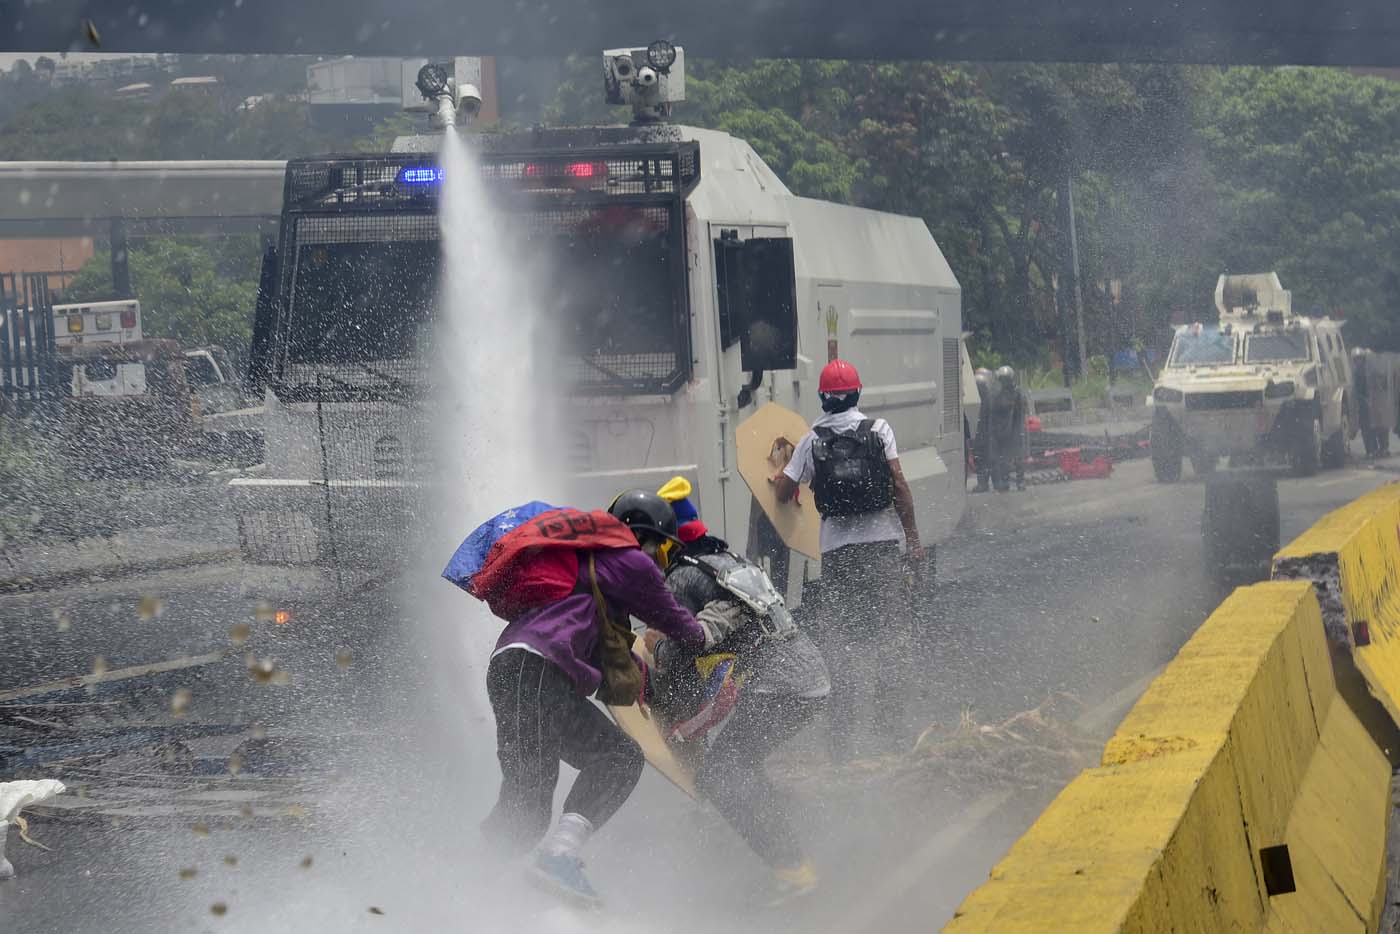 Demonstrators are sprayed by a riot police water cannon during clashes within a protest against Venezuelan President Nicolas Maduro, on May 3, 2017. Venezuela's angry opposition rallied Wednesday vowing huge street protests against President Nicolas Maduro's plan to rewrite the constitution and accusing him of dodging elections to cling to power despite deadly unrest. / AFP PHOTO / RONALDO SCHEMIDT